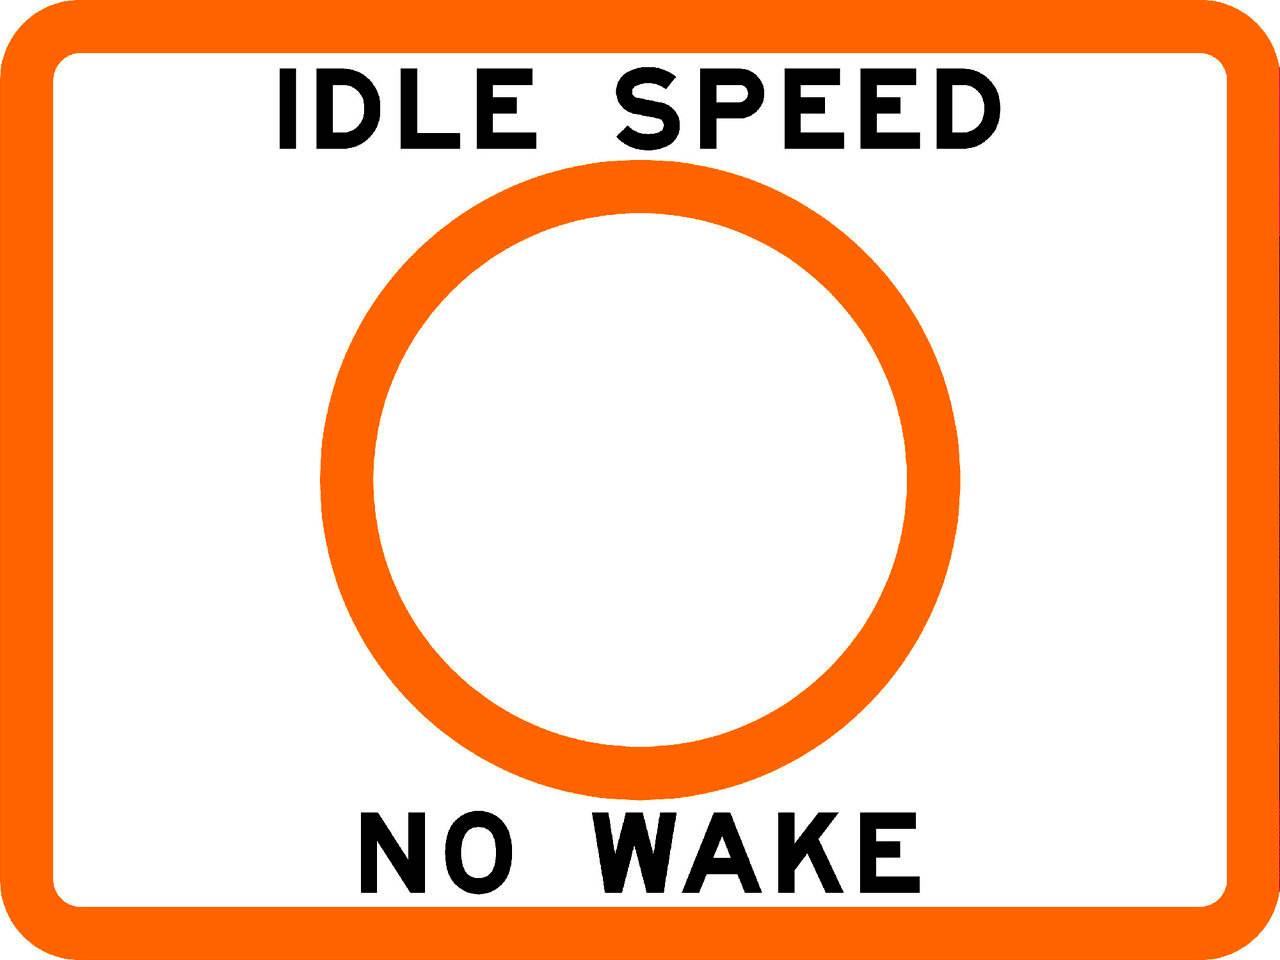 Sign indicating "Idle Speed No Wake," reminding boaters to comply with Panama City's boating regulations to protect wildlife and reduce erosion.